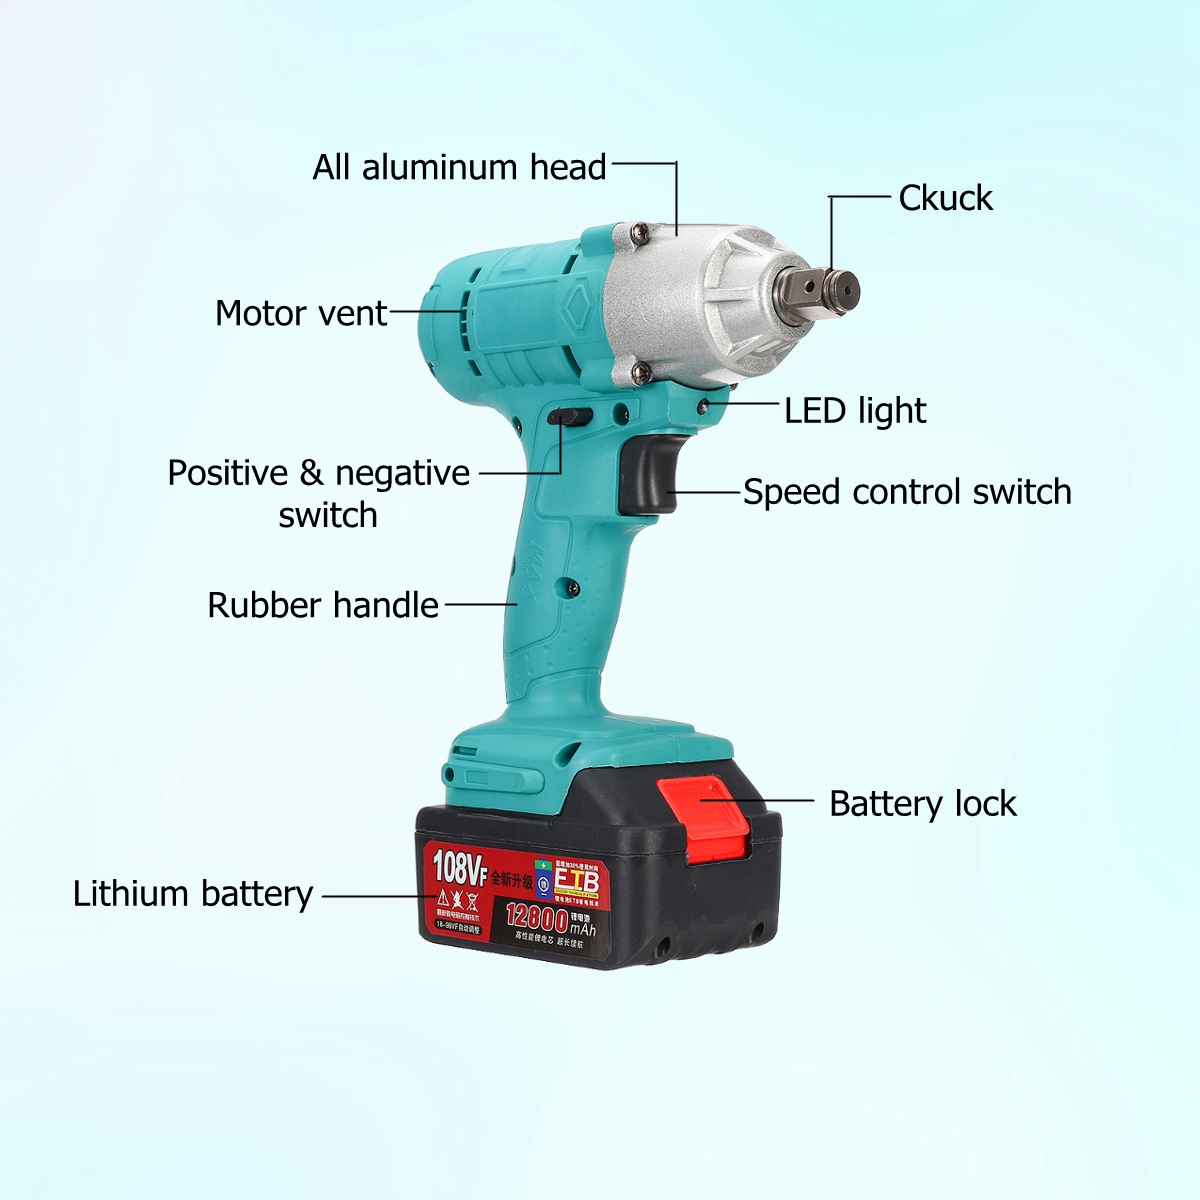 108VF-12800mAh-Lithium-Ion-Battery-Electric-Cordless-Impact-Wrench-Drill-Driver-Kit-1466581-4